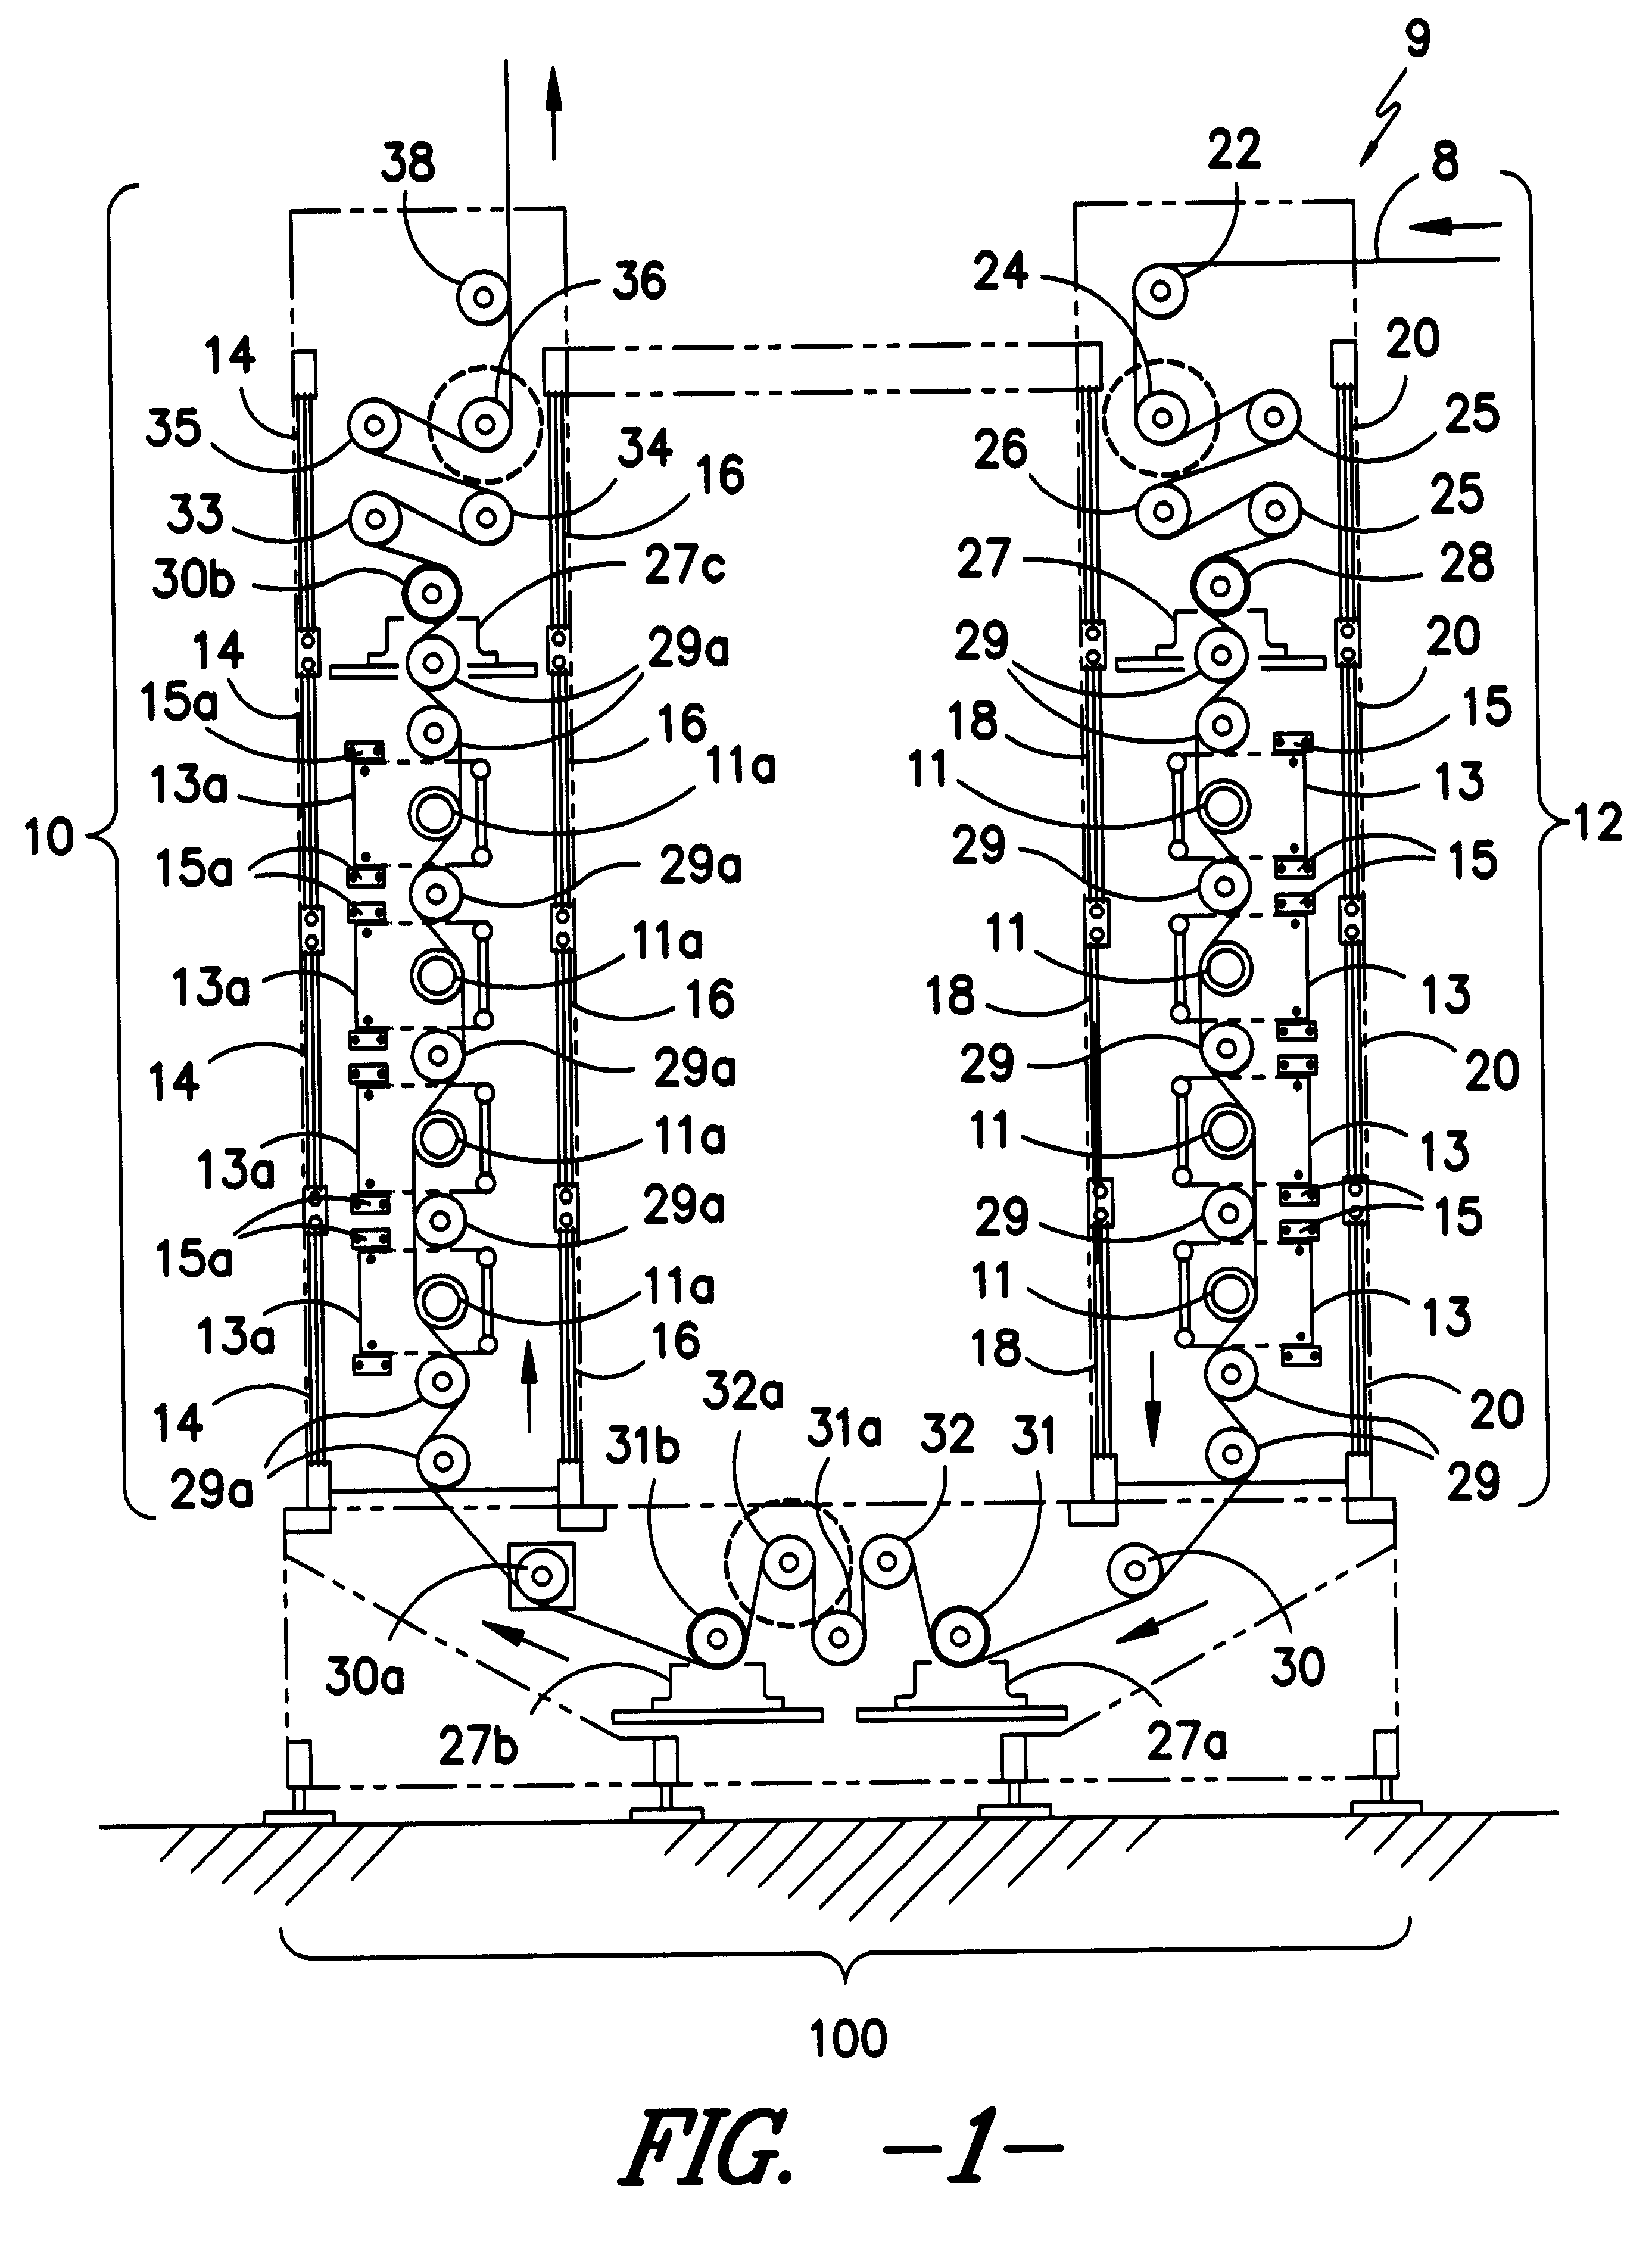 Face finishing of cotton-containing fabrics containing immobilized fibers